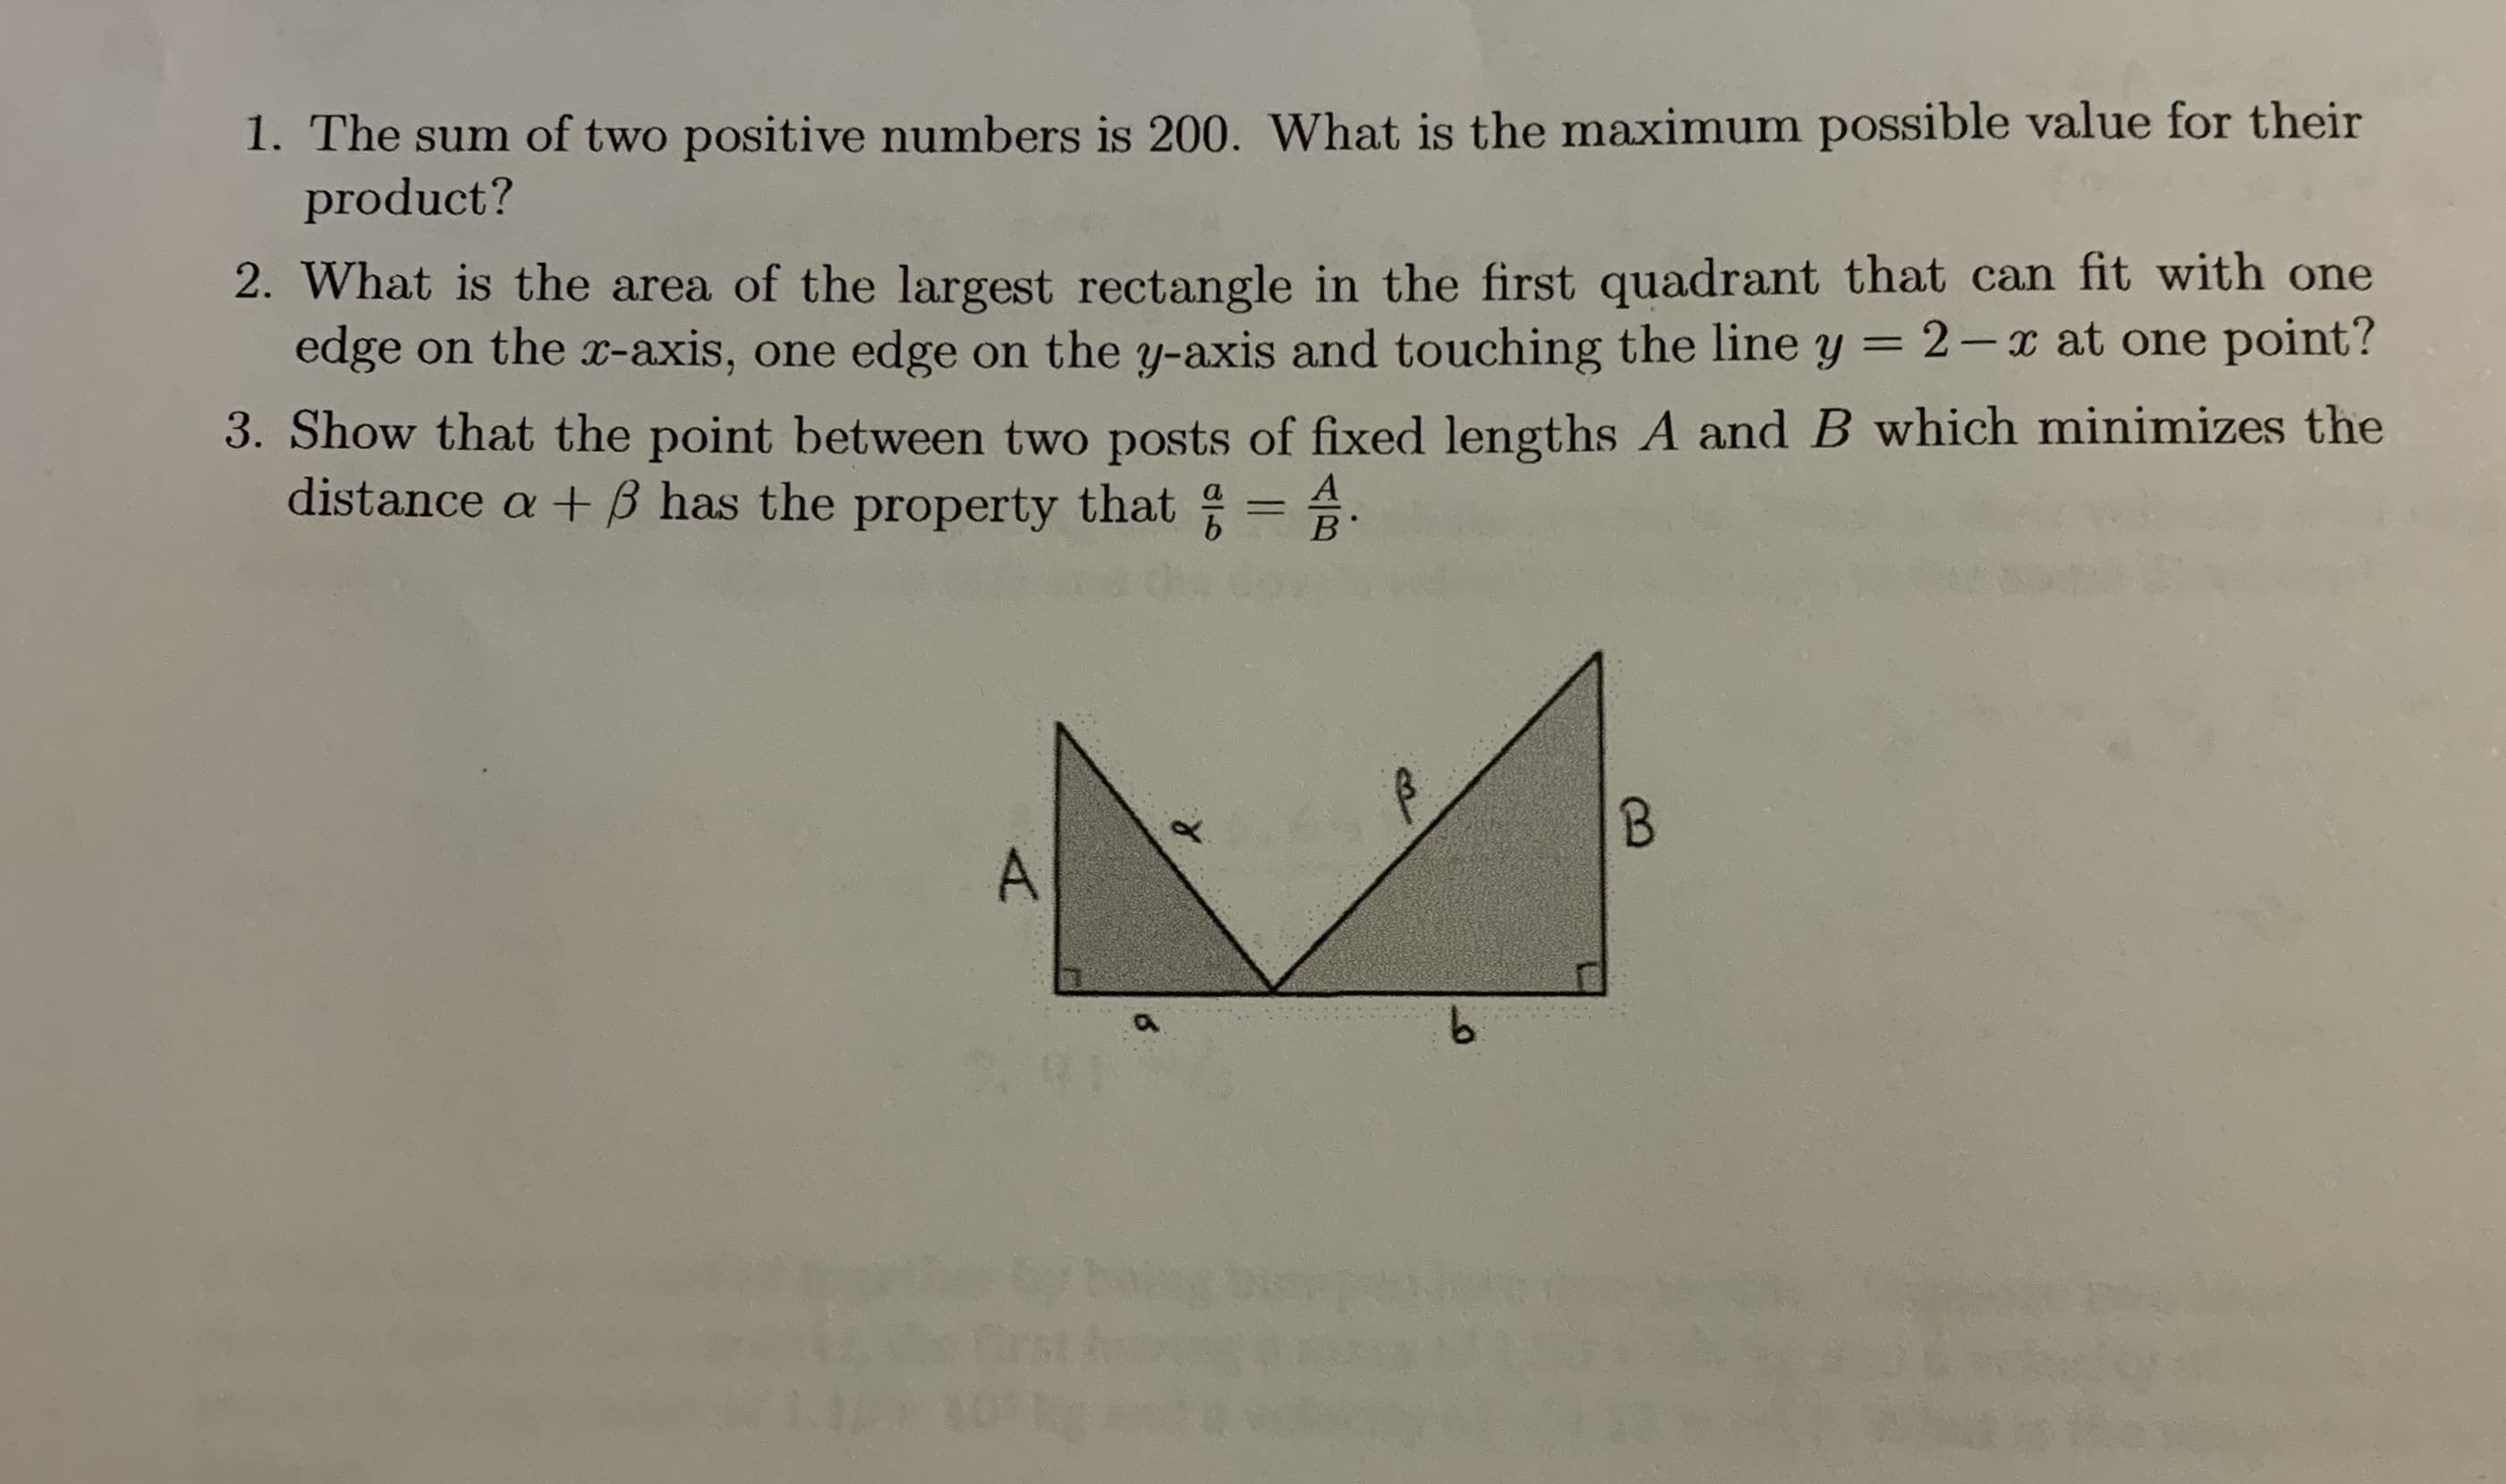 1. The sum of two positive numbers is 200. What is the maximum possible value for their
product?
2. What is the area of the largest rectangle in the first quadrant that can fit with one
edge on the x-axis, one edge on the y-axis and touching the line y = 2-x at one point?
3. Show that the point between two posts of fixed lengths A and B which minimizes the
distance a + B has the property that = A
A
B.
9.
